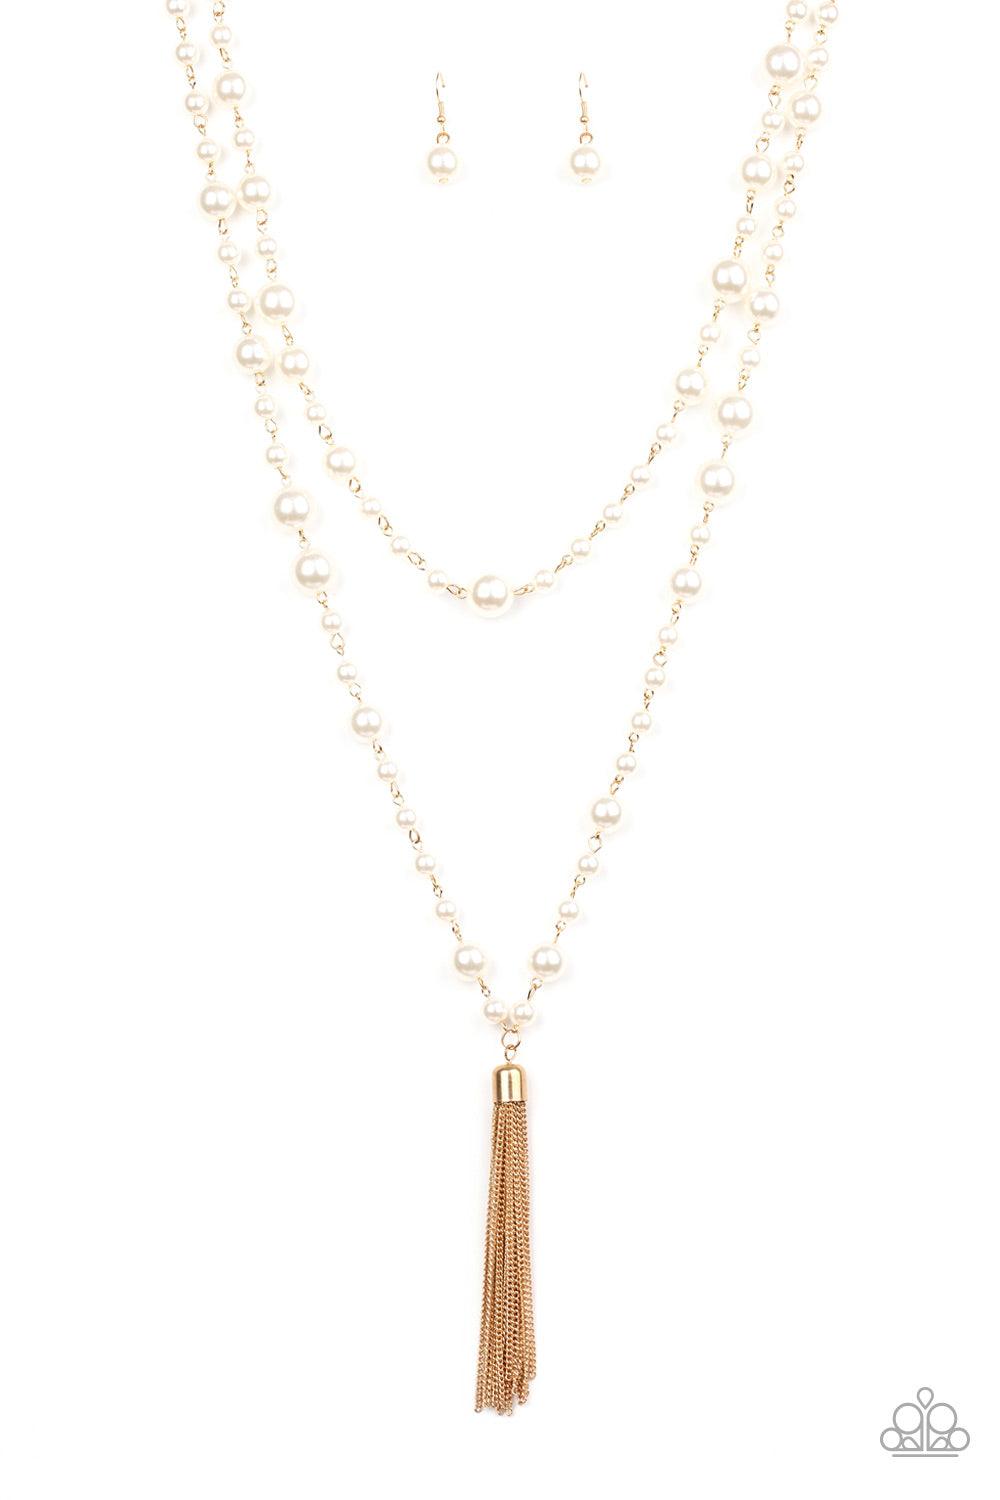 Paparazzi Accessories Social Hour - Gold A collection of bubbly white pearls link into two strands down the chest. A shimmery gold tassel swings from the lowermost strand, adding a timeless twist to the classic pearl palette. Features an adjustable clasp